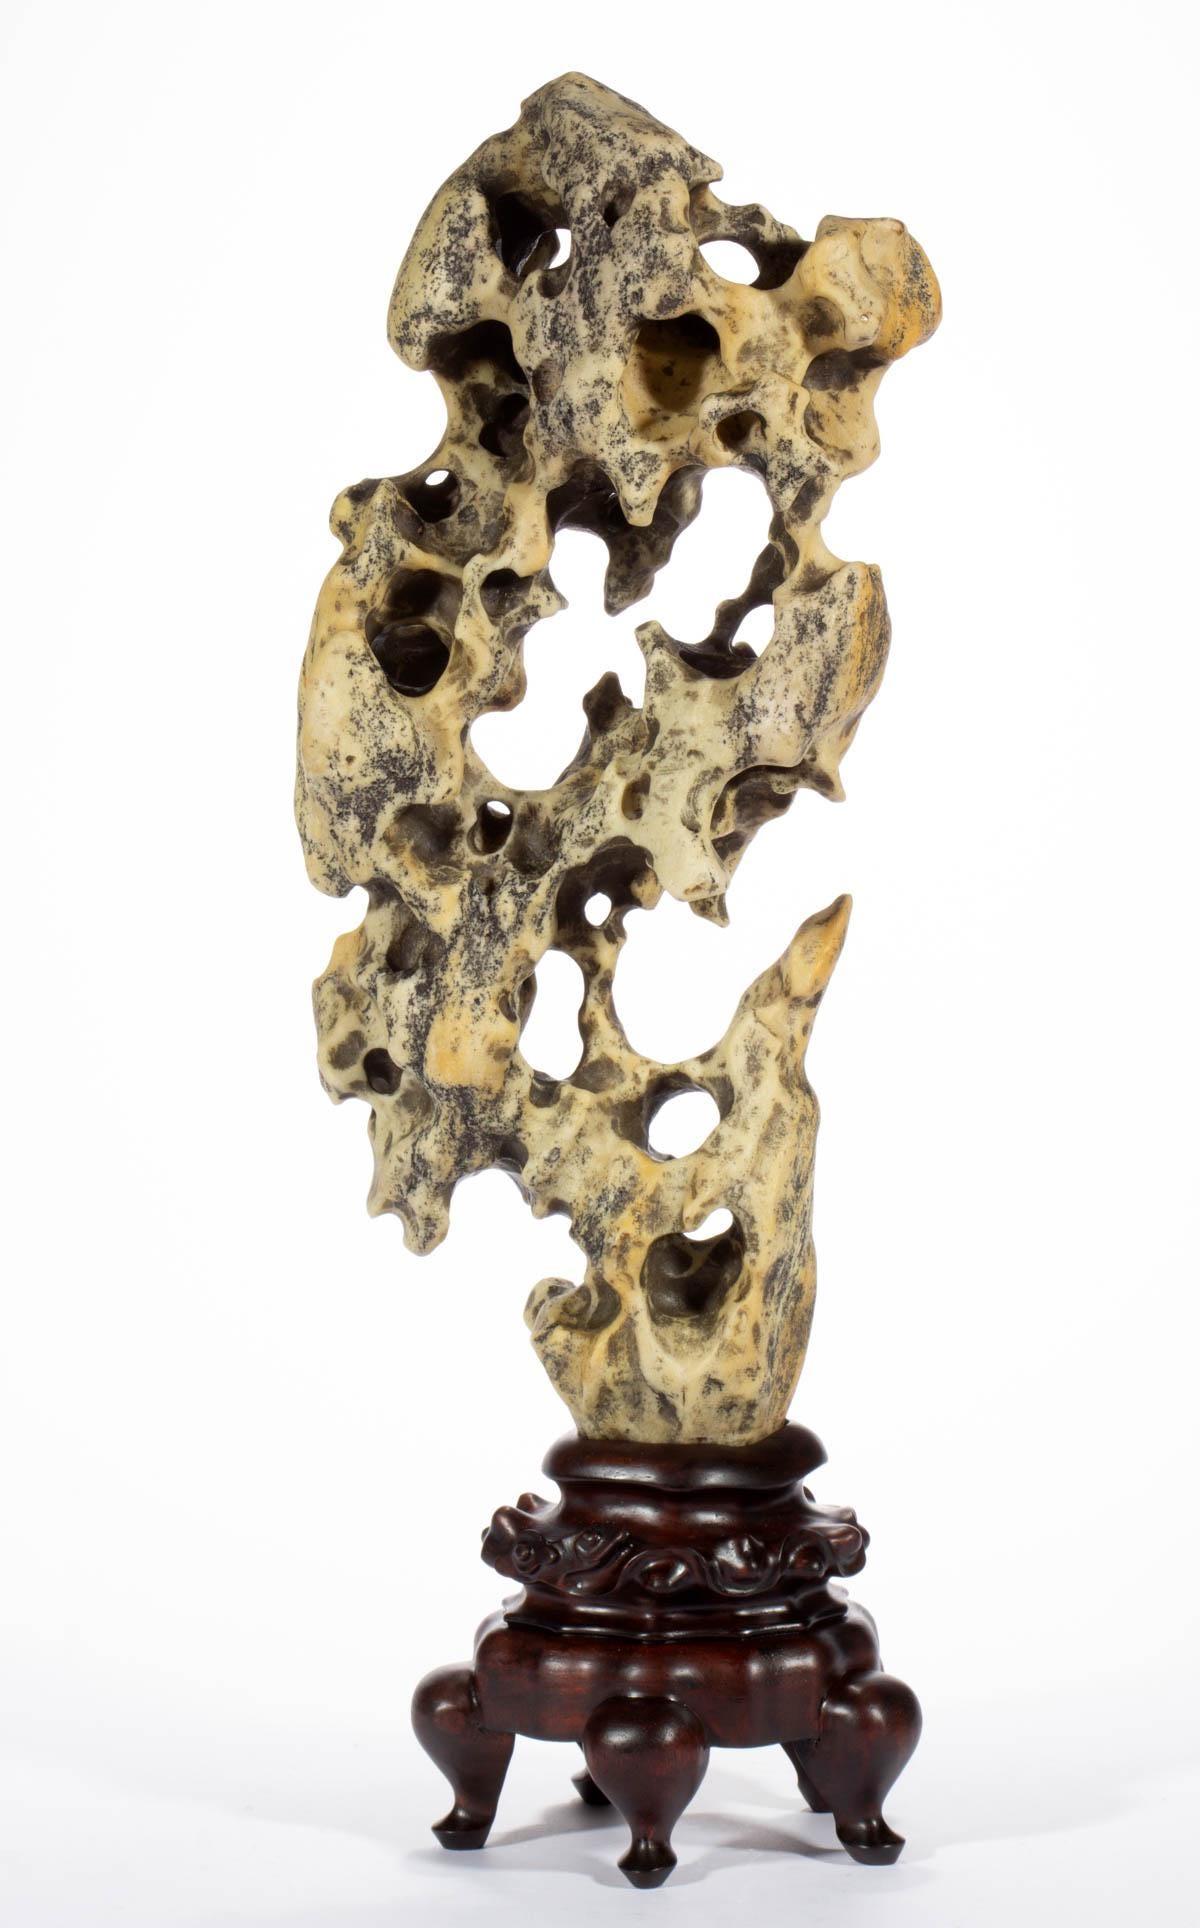 This is a slender Taihu scholar rock in an upright form displayed on a custom wood stand. Wonderful and well-balanced form, the rock has a nearly mirage image between the front and the back. It is of an uncommon waxy yellow color with black deposits